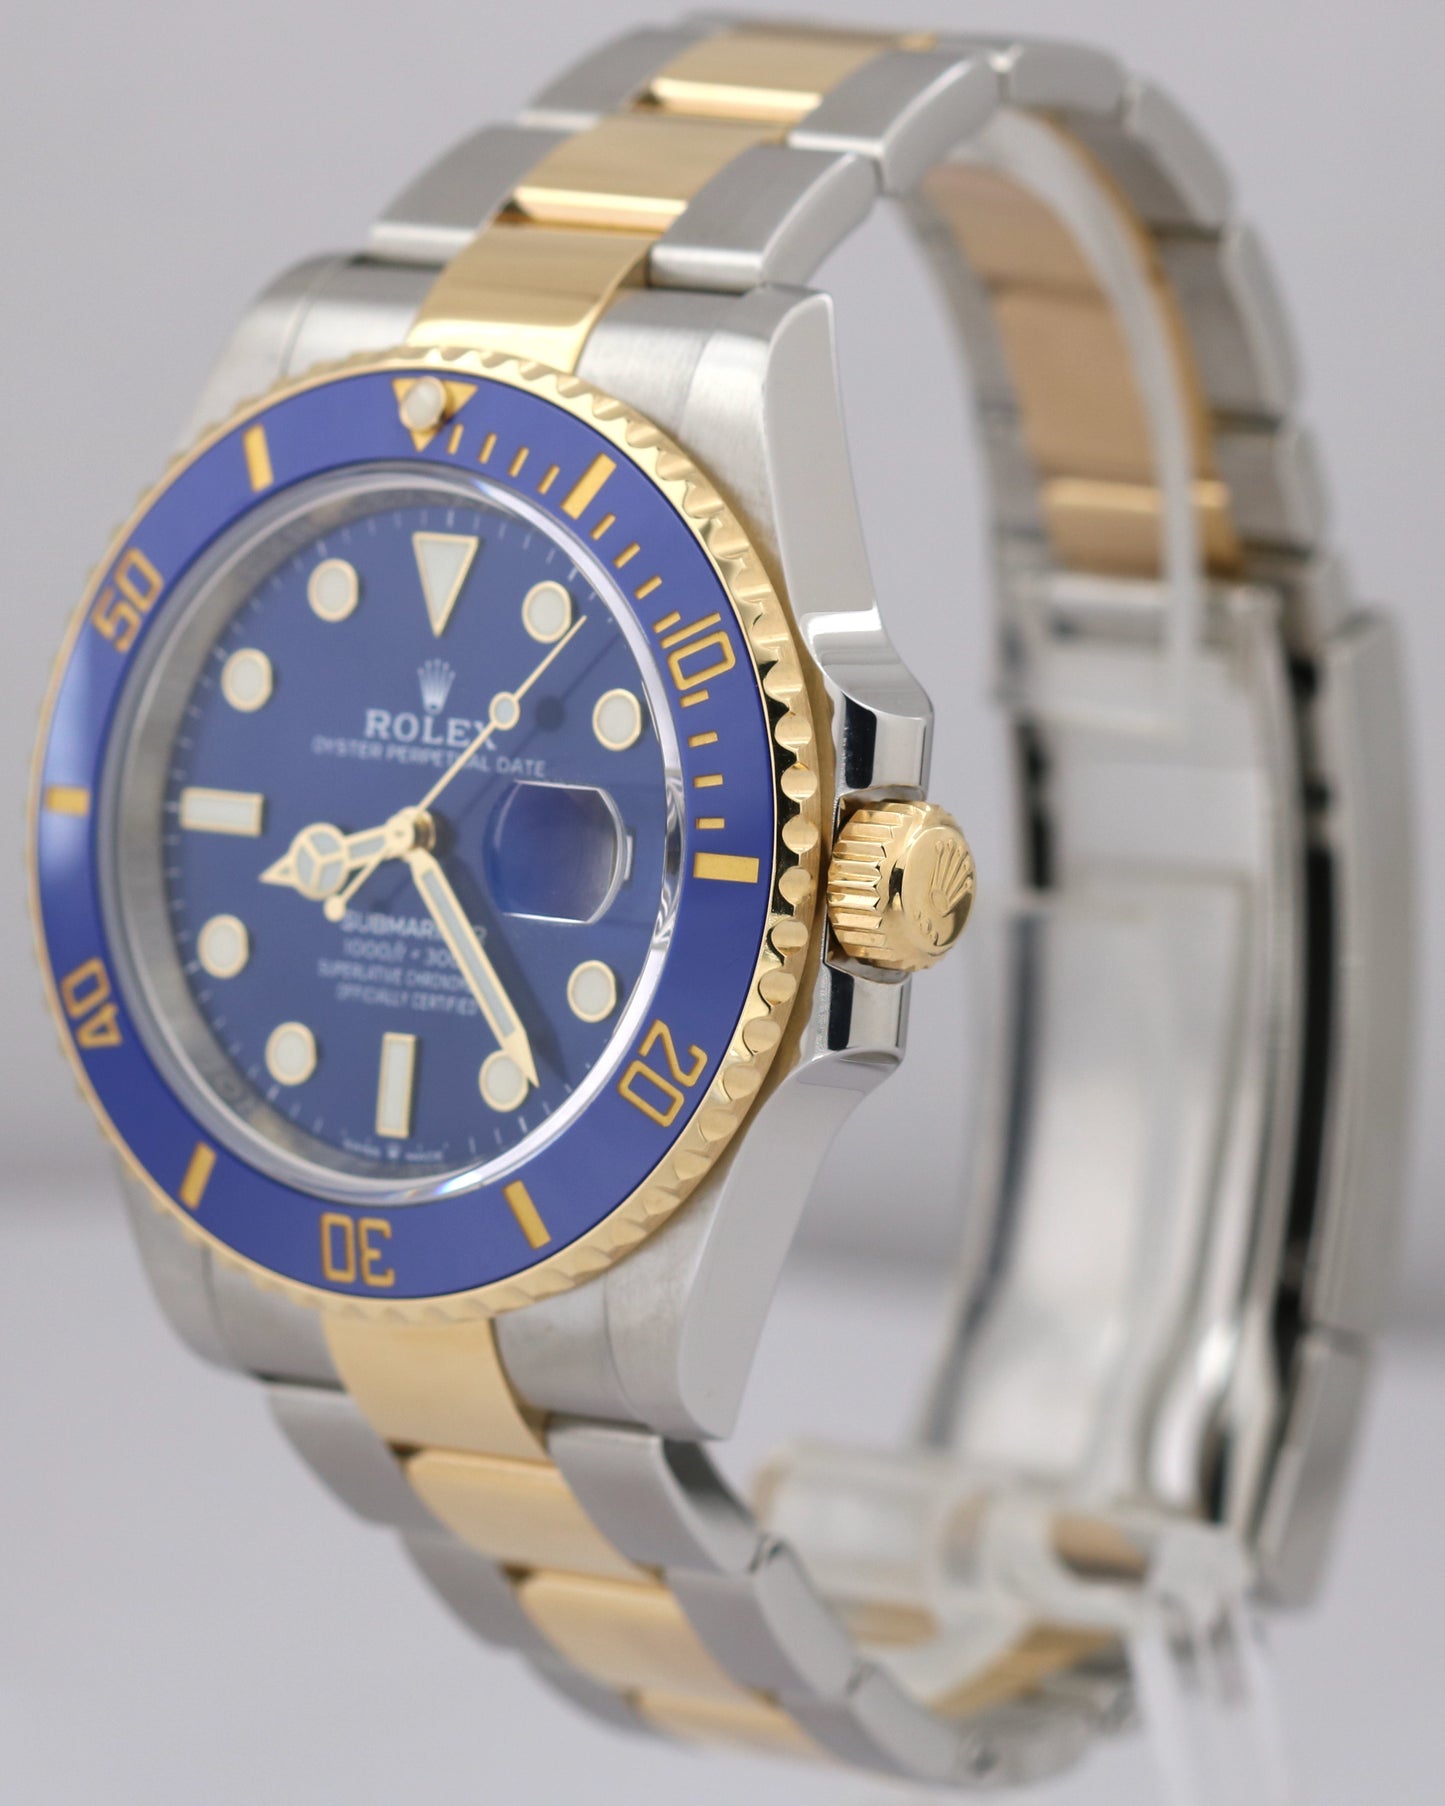 MINT 2021 PAPERS Rolex Submariner Date 41mm BLUE Two-Tone 18K Gold 126613 LB BOX